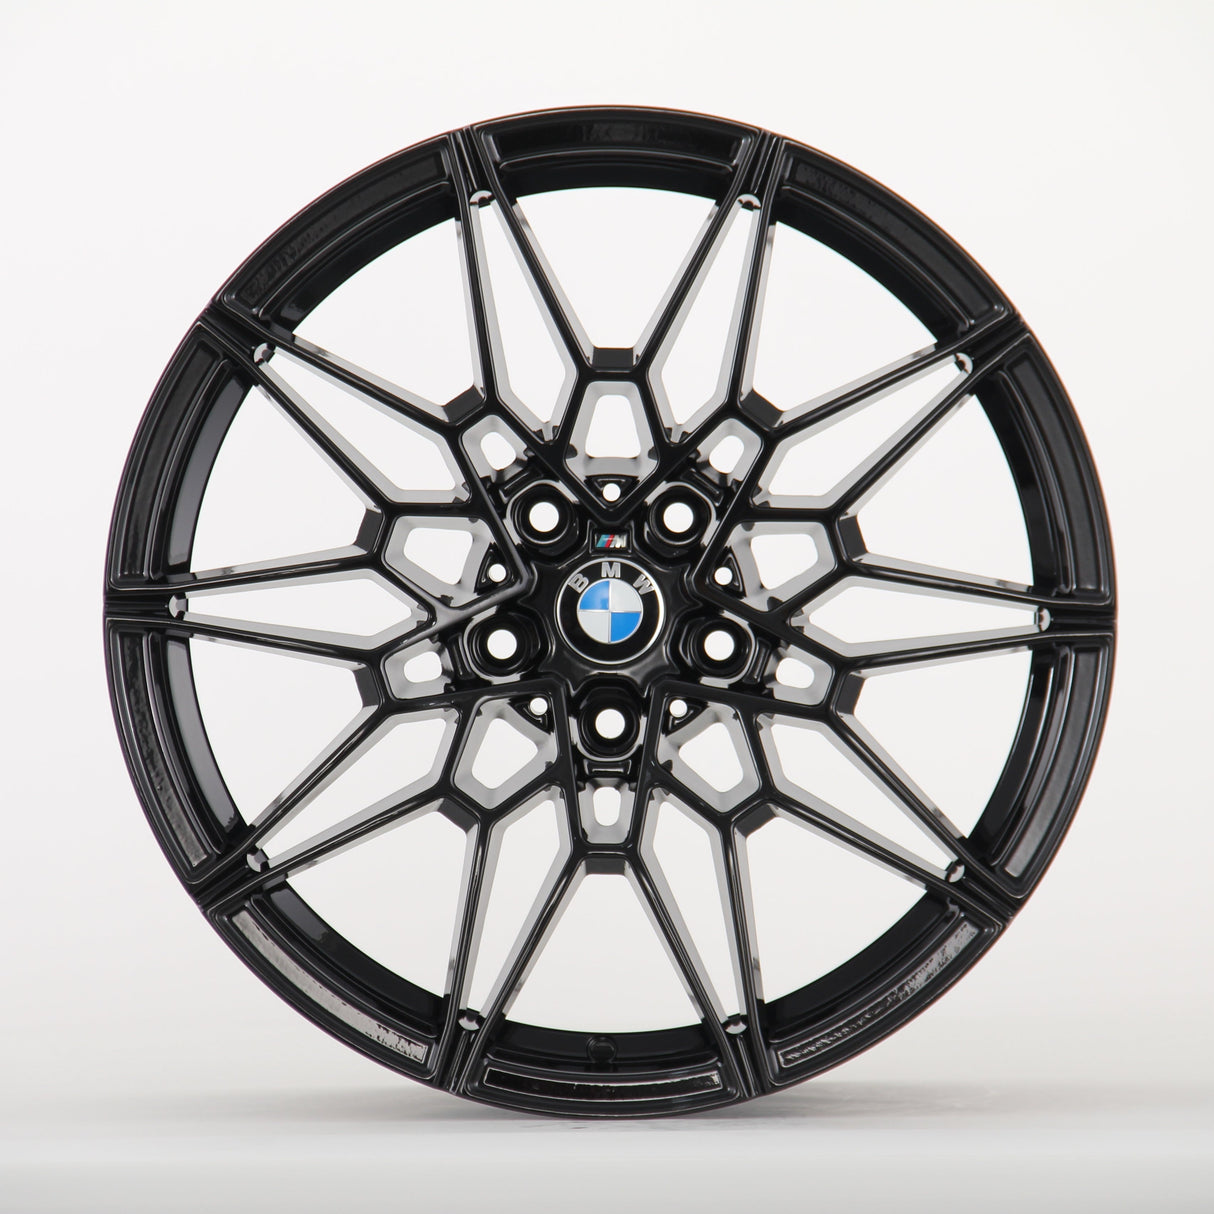 1 Series - F20/F21: 19" Gloss Black 826M Competition Style Alloy Wheels 11-19